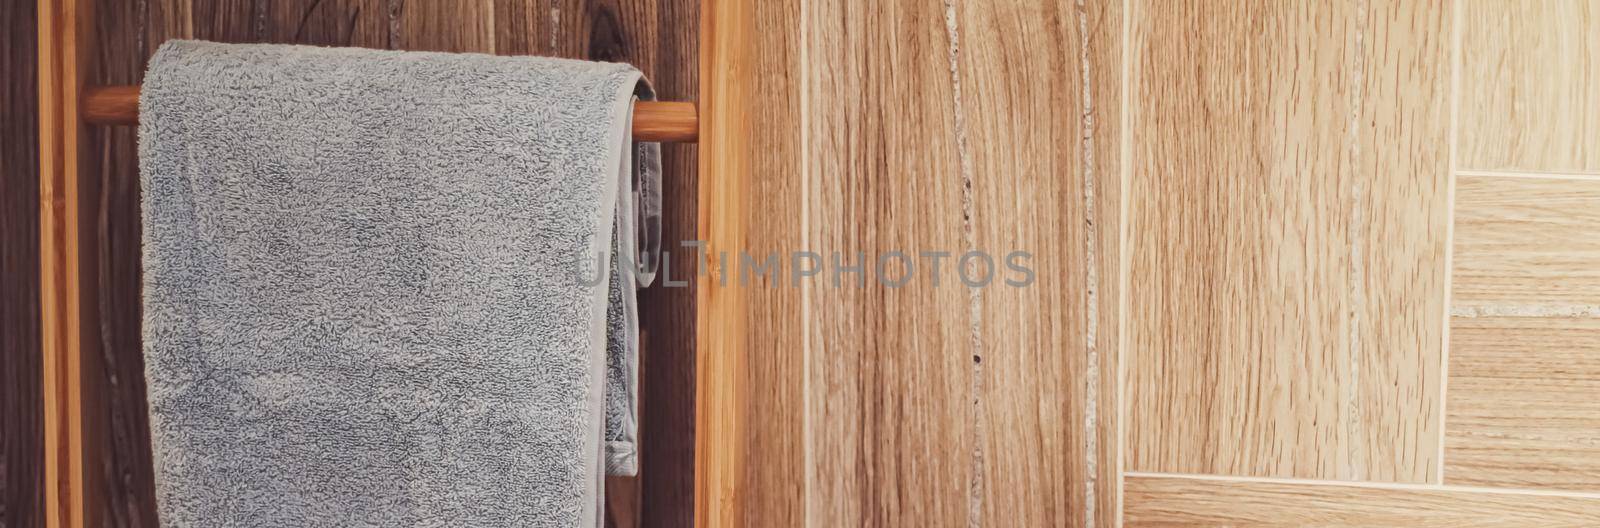 Organic and sustainable bath towel in an eco-friendly bathroom, home decor and luxury interior design by Anneleven